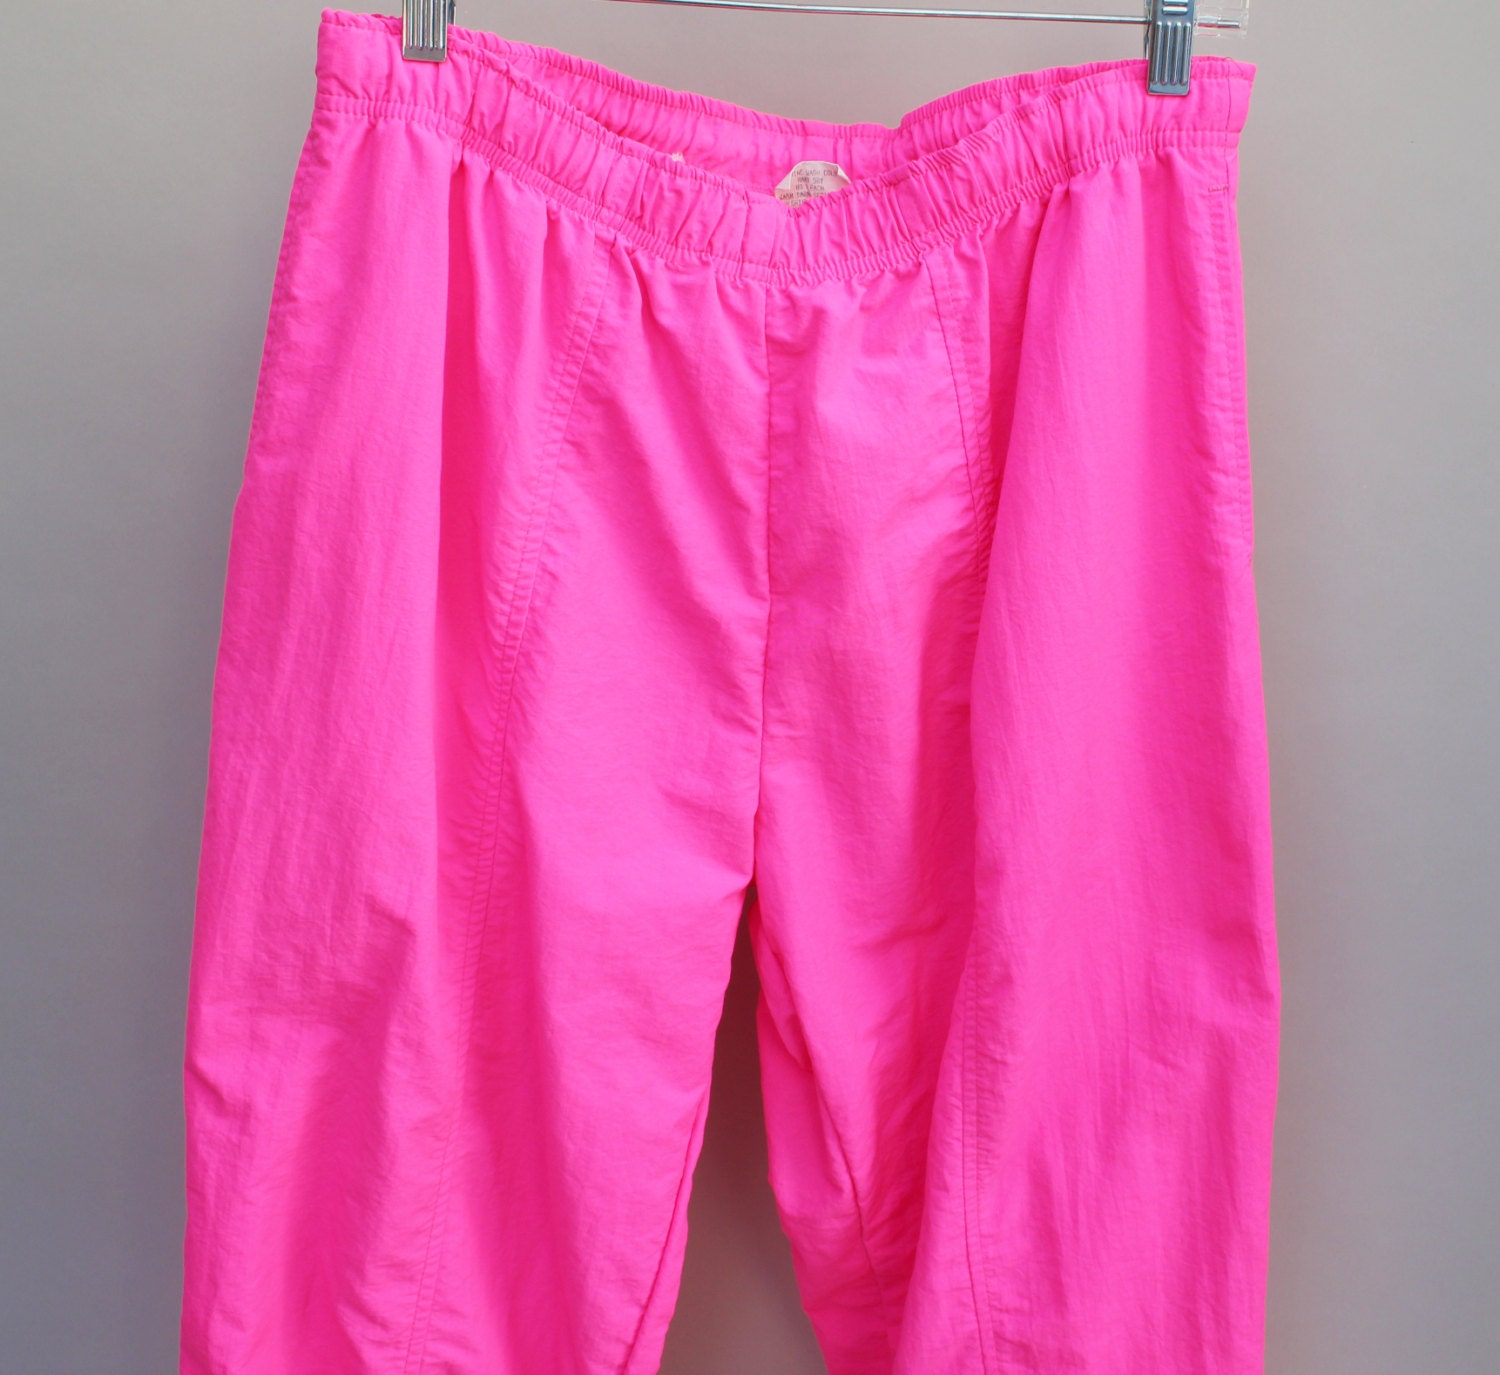 80s vintage neon track pants zipper ankles bright pink